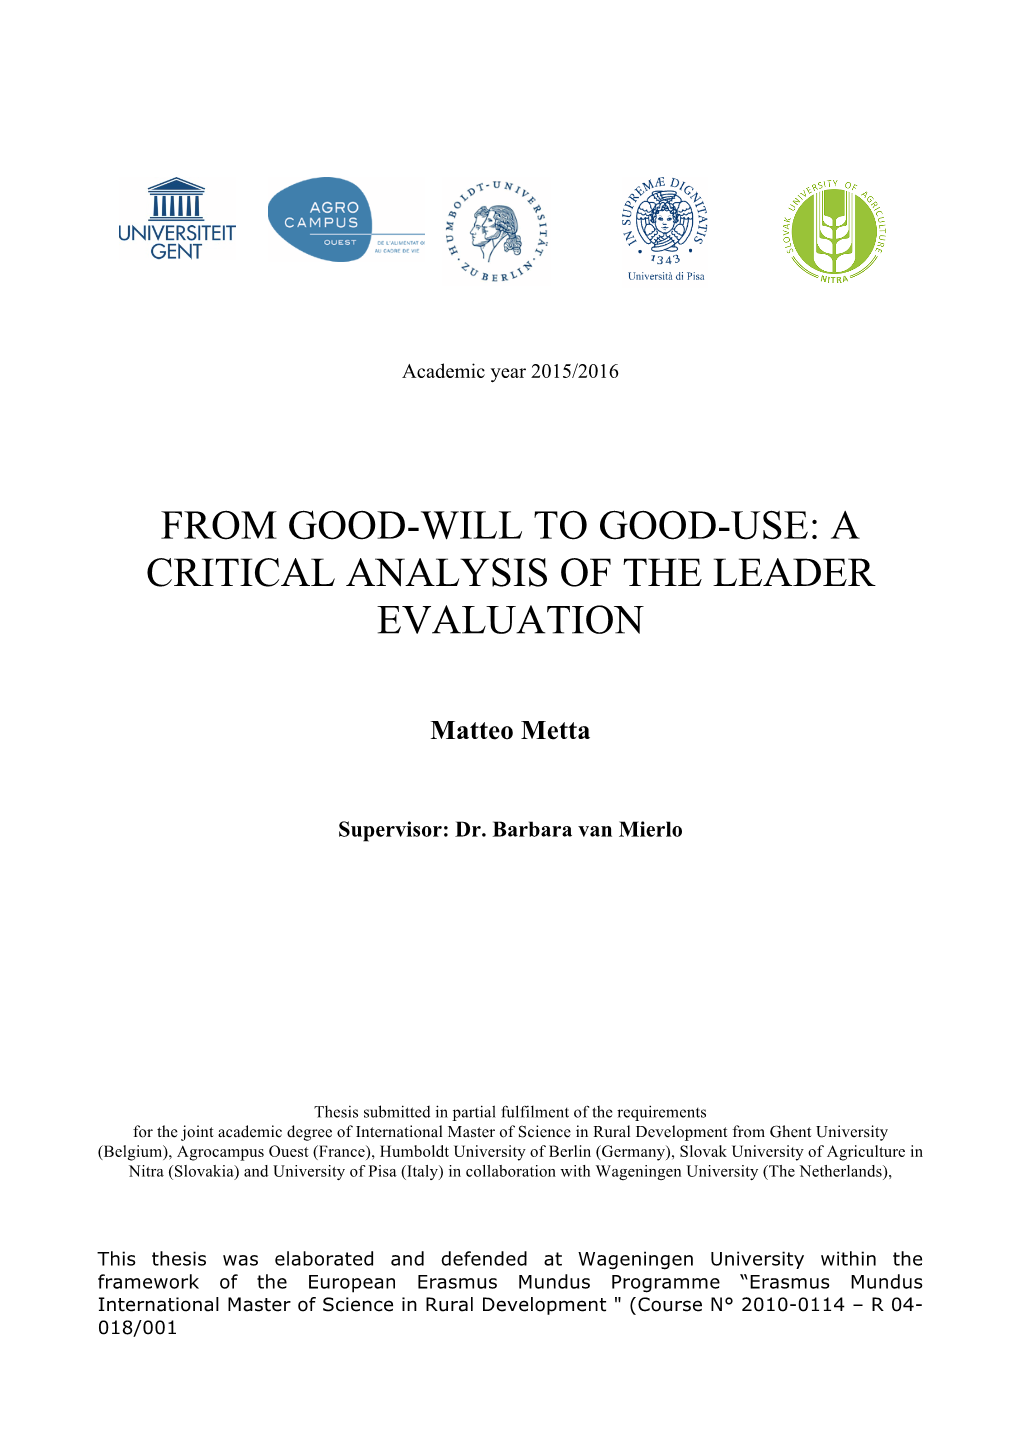 A Critical Analysis of the Leader Evaluation